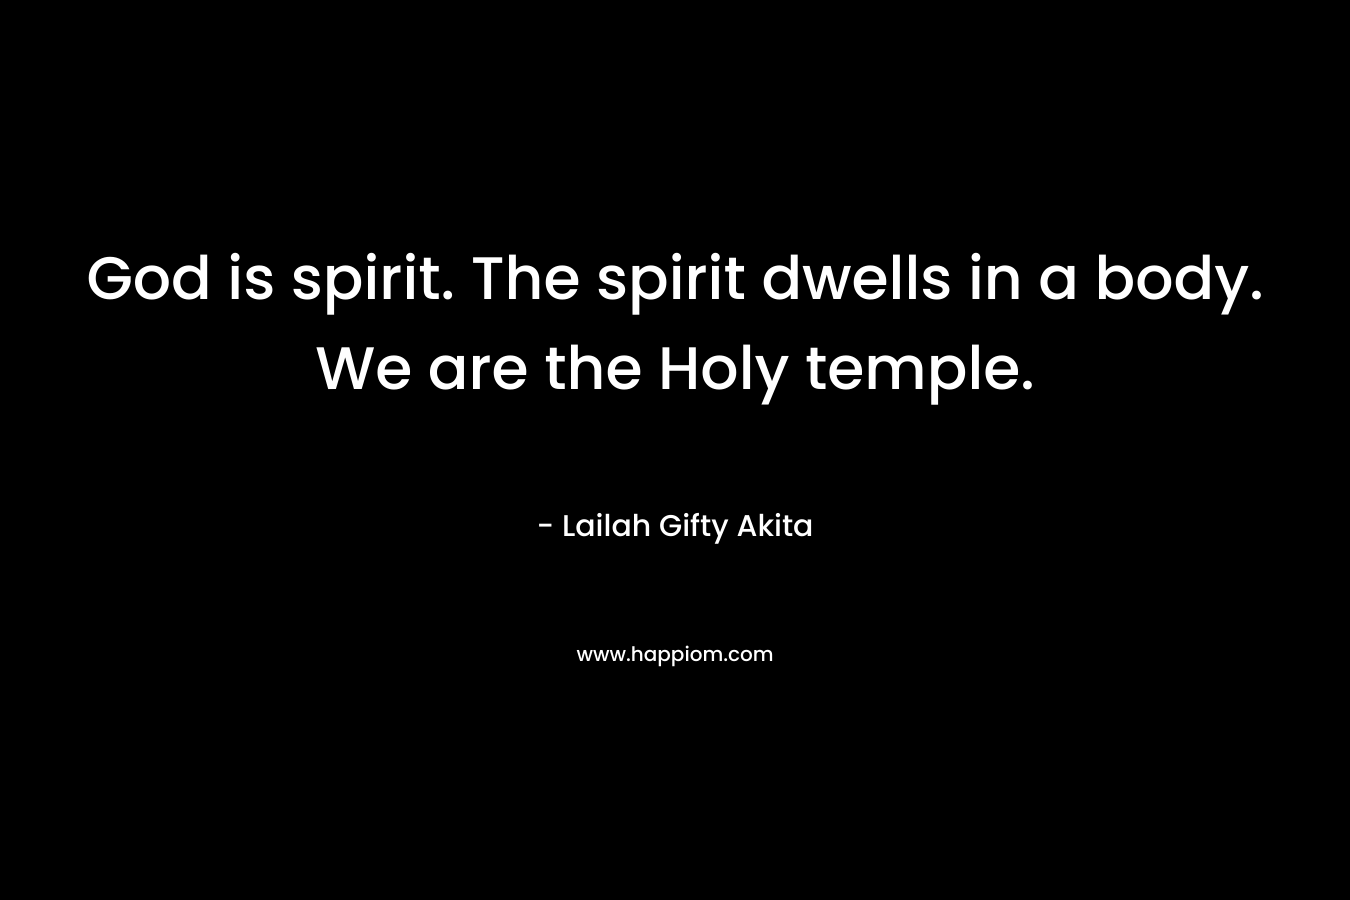 God is spirit. The spirit dwells in a body. We are the Holy temple.